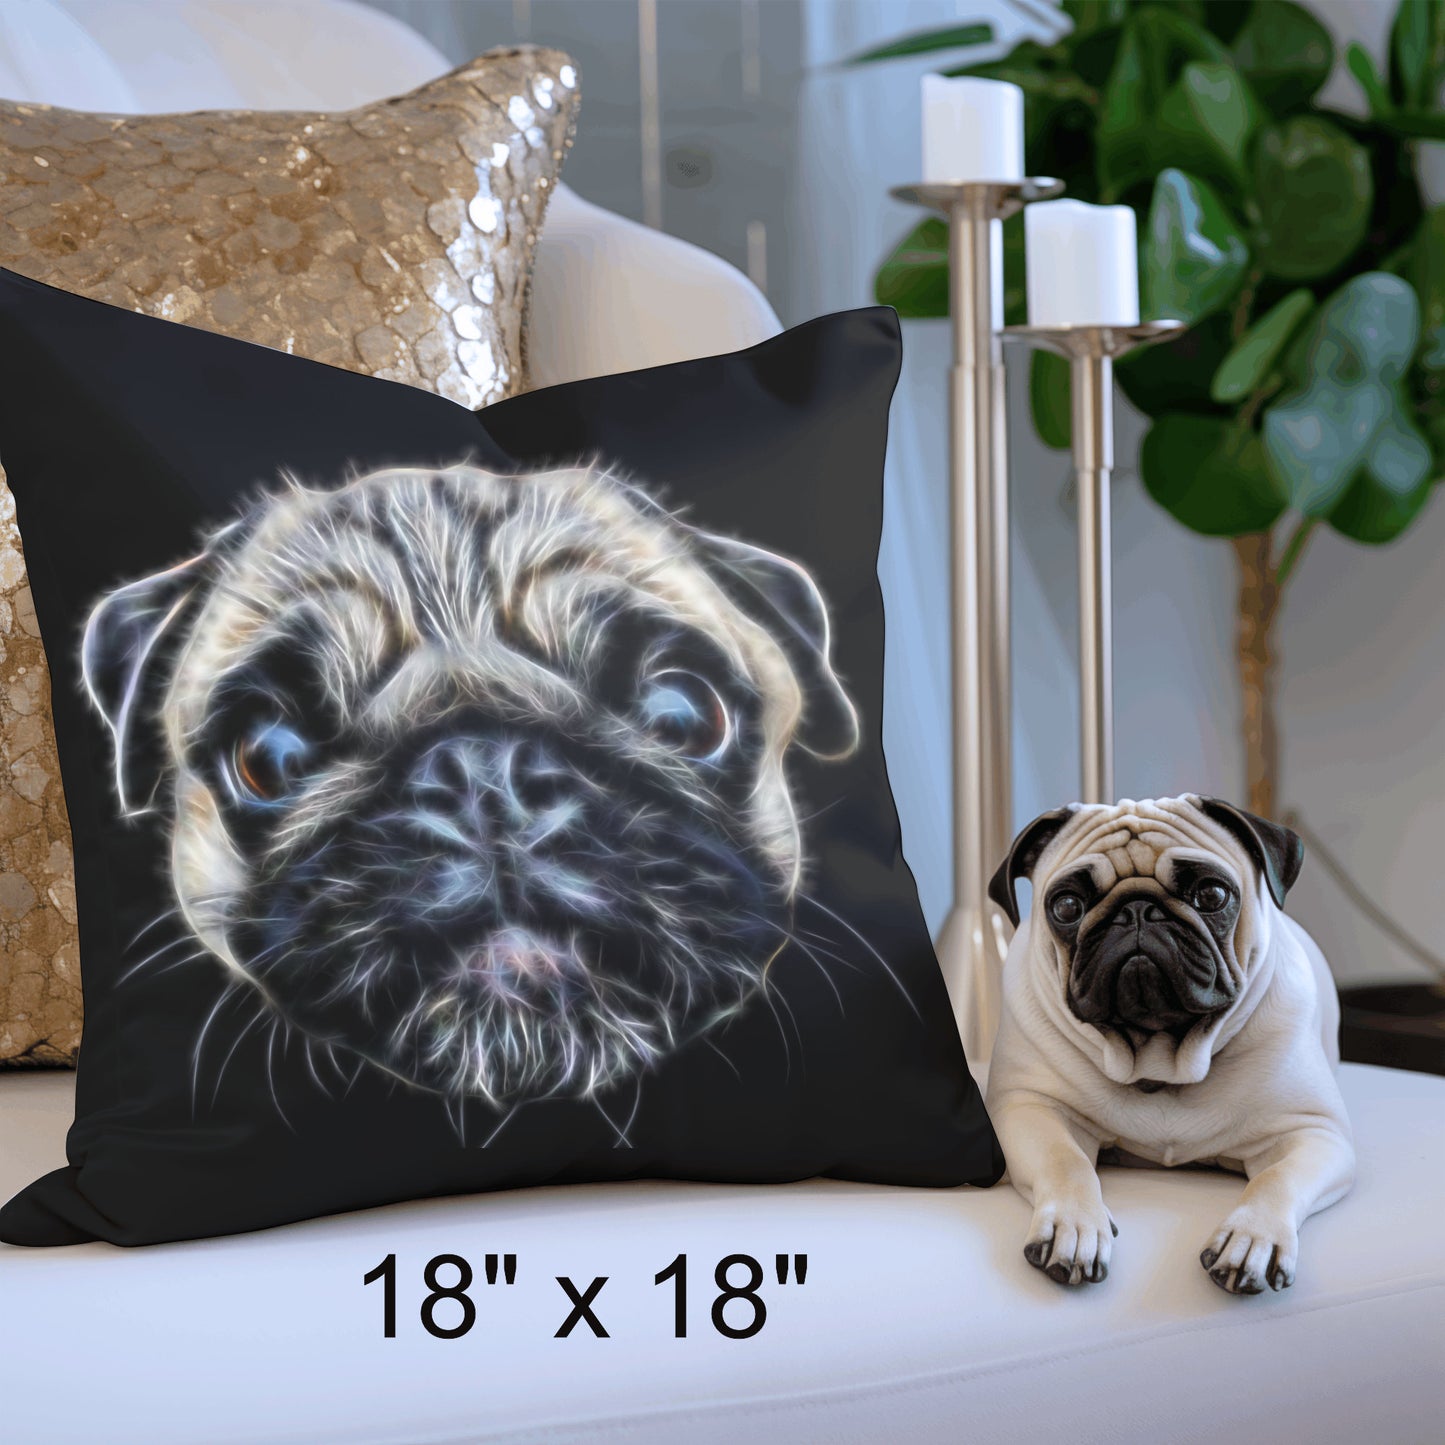 Jack Russell Cushion and Insert